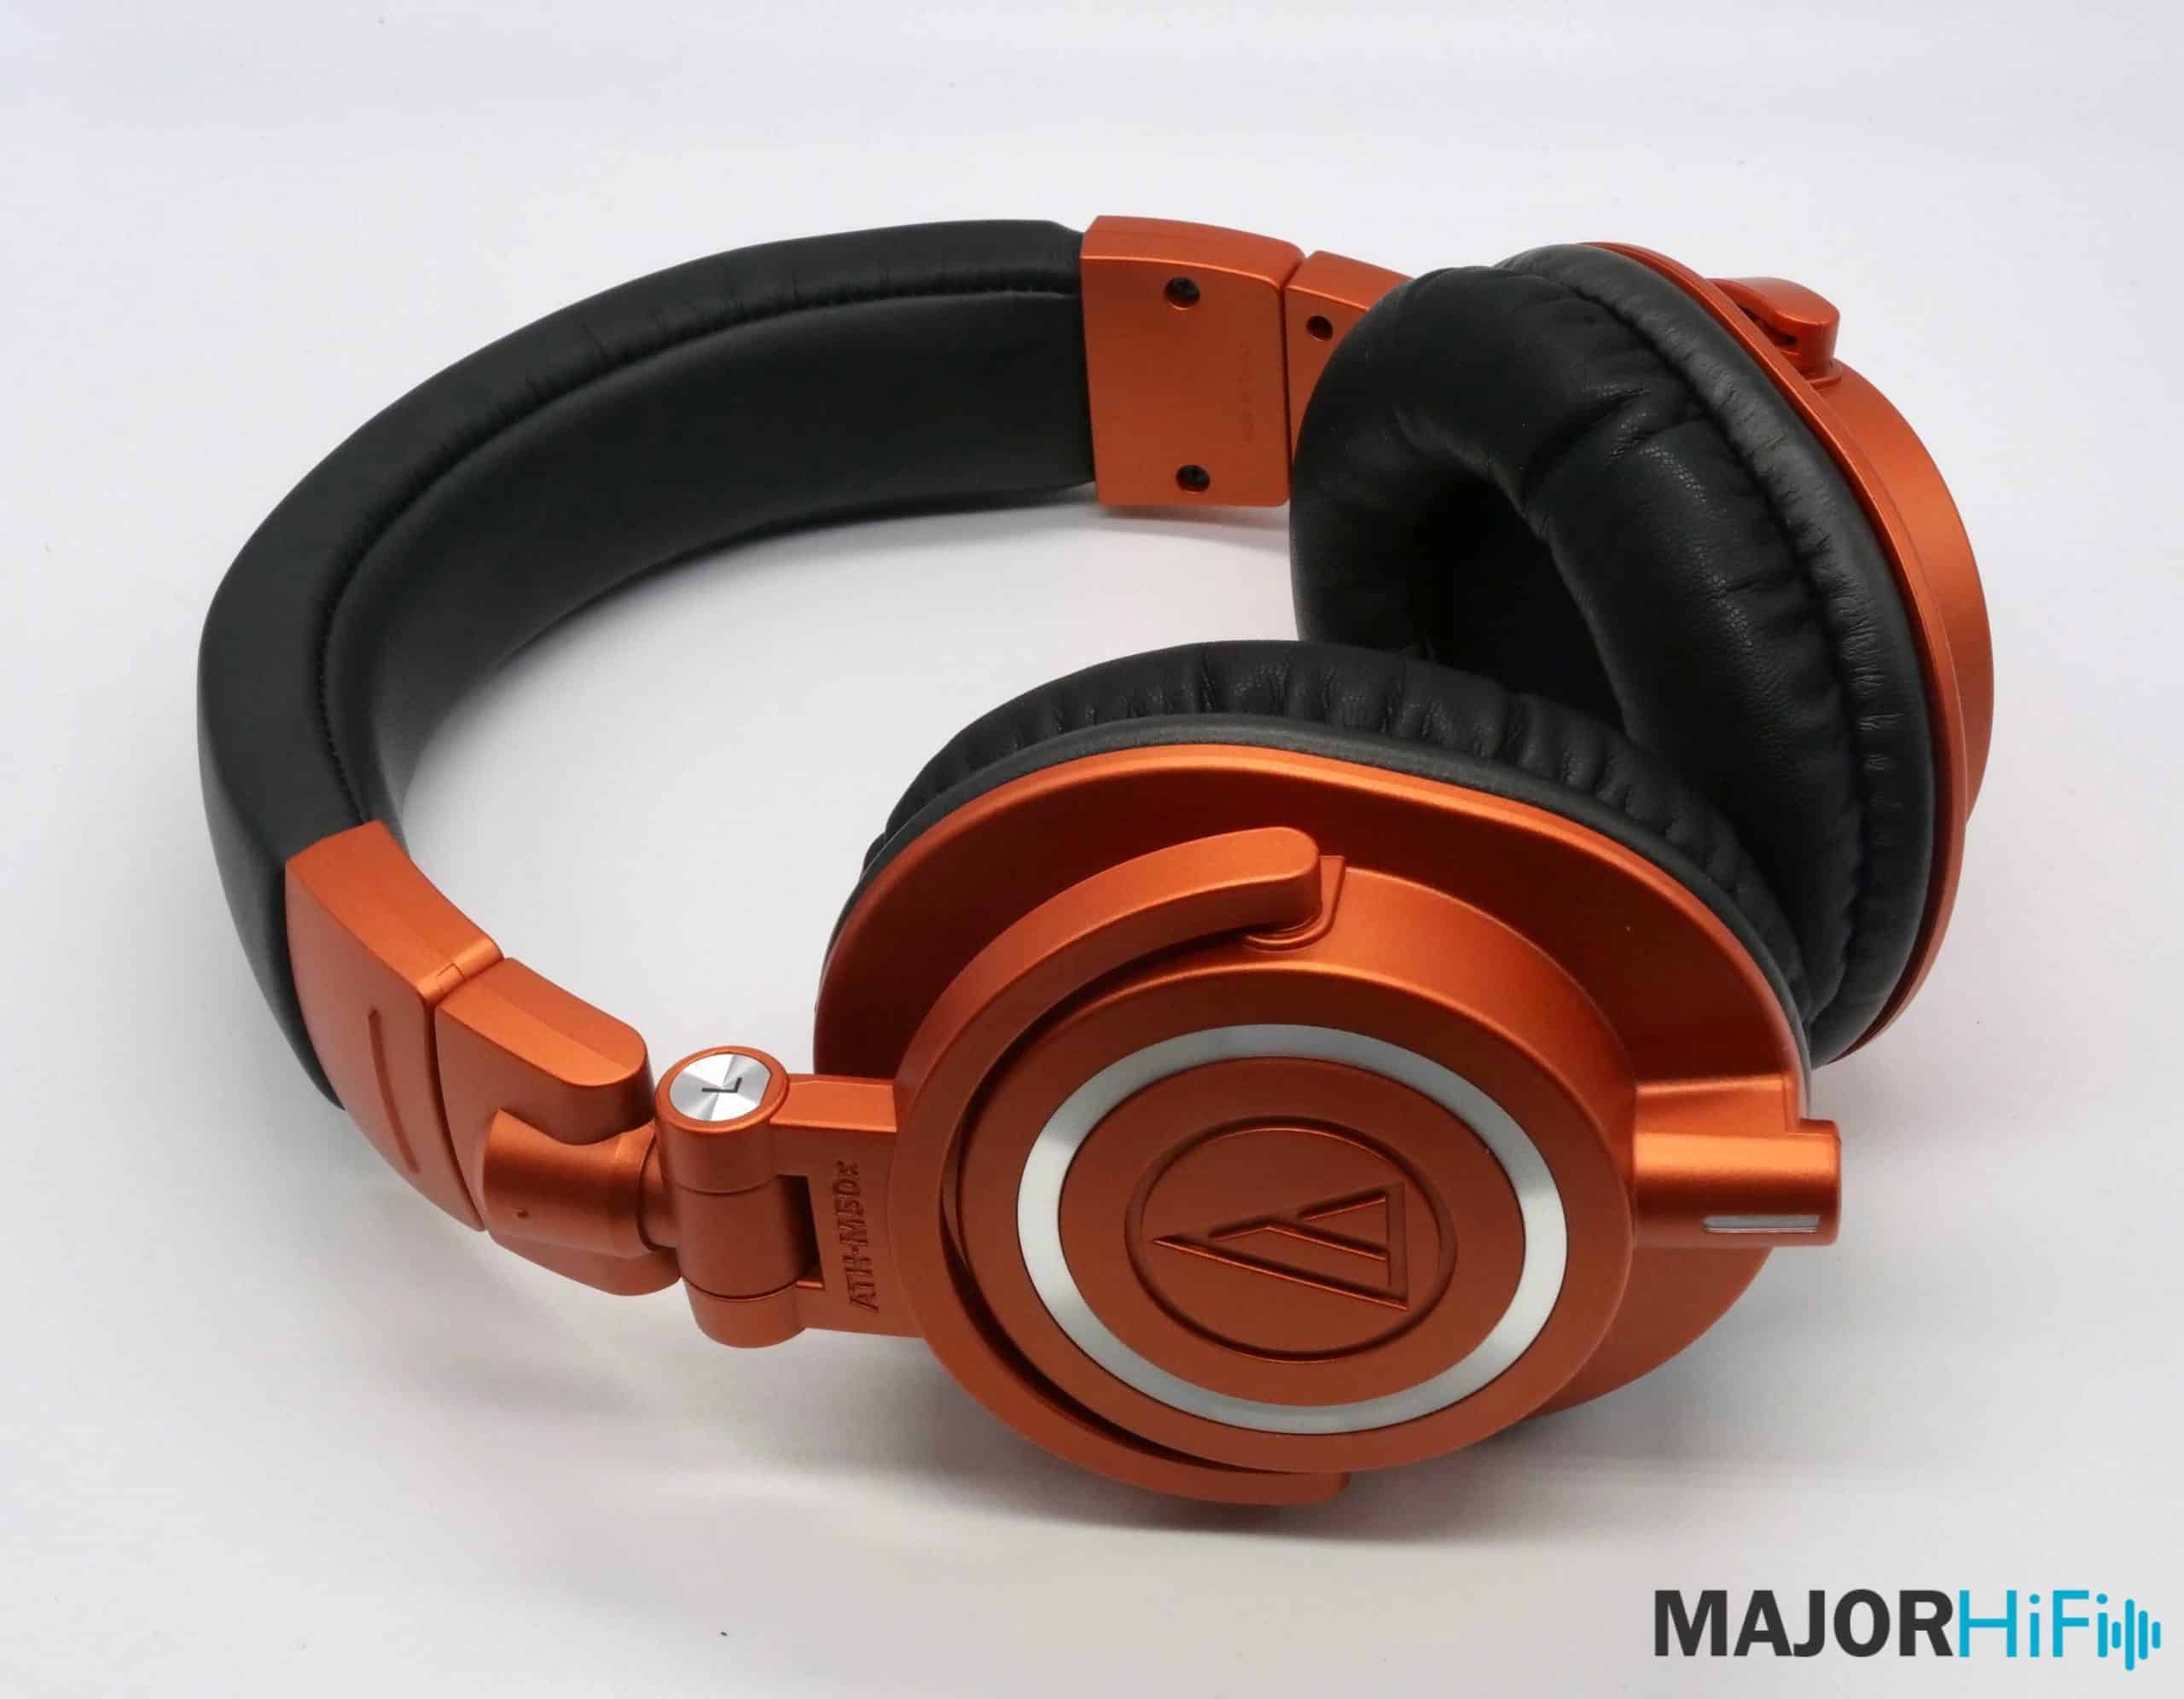 Revisiting a Classic: Audio-Technica ATH-M50x Review – “Lantern Glow”  Limited Edition - Major HiFi